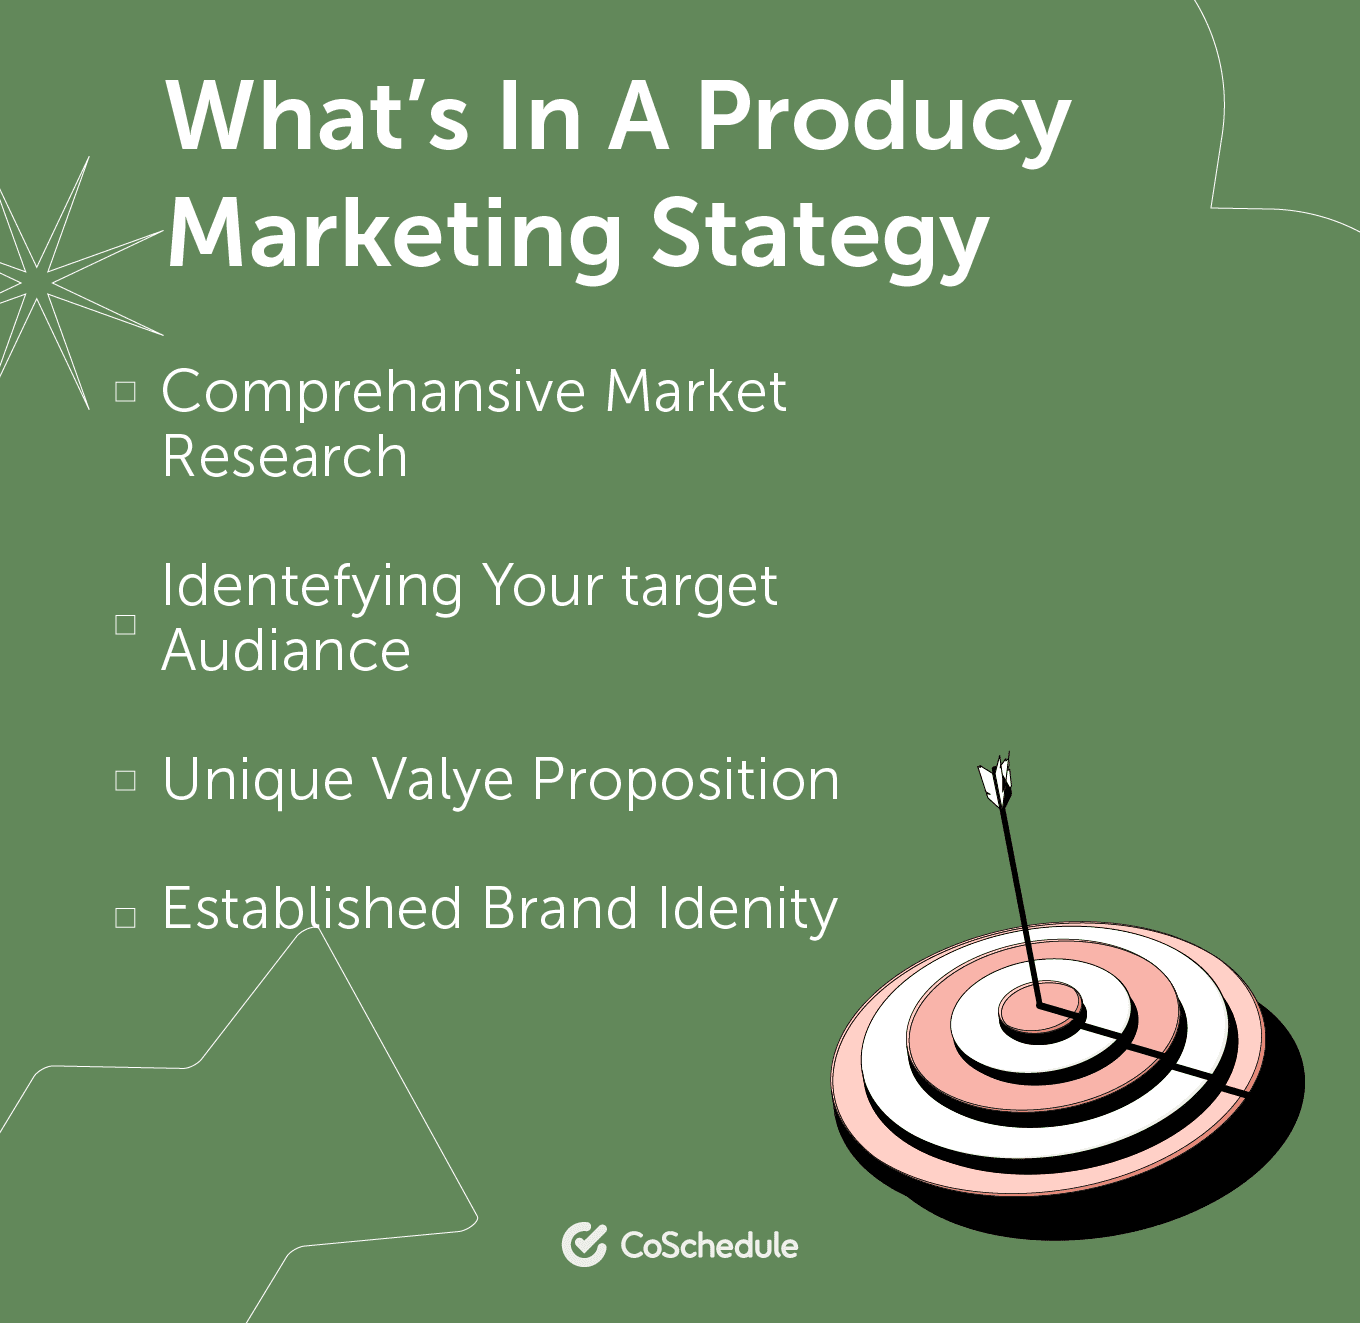 "What's In A Producy Marketing Strategy" from CoSchedule